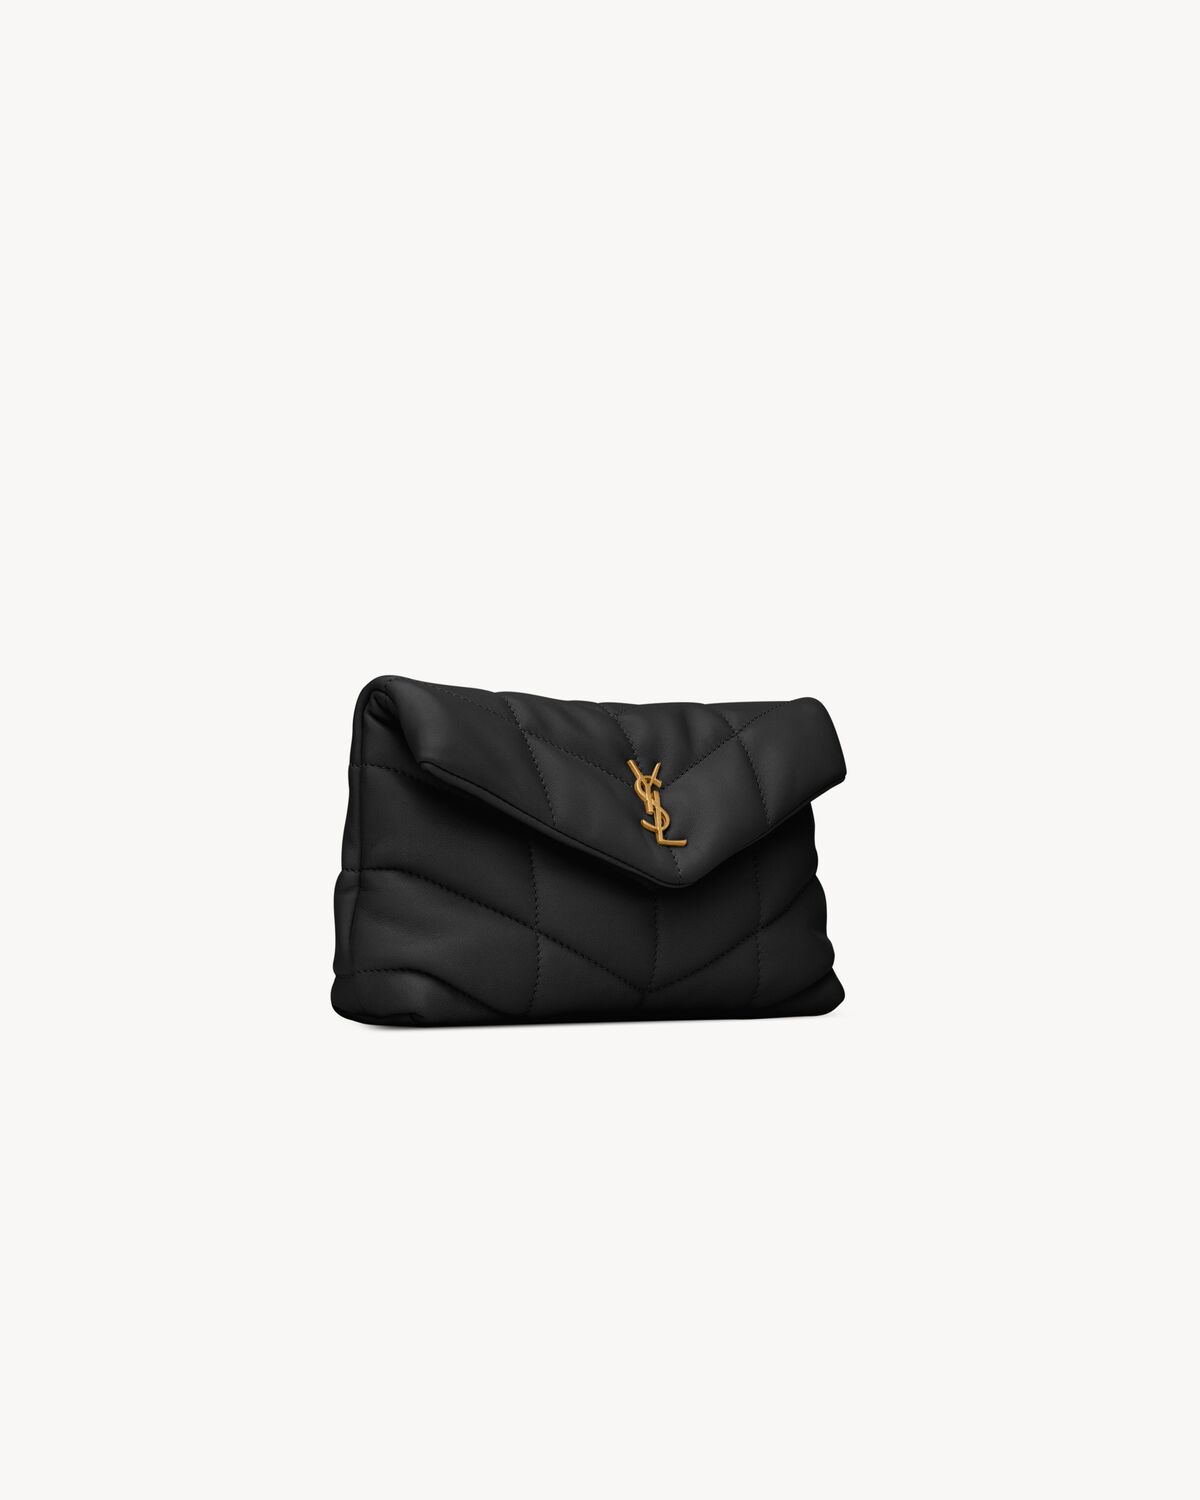 PUFFER small pouch in Nappa leather